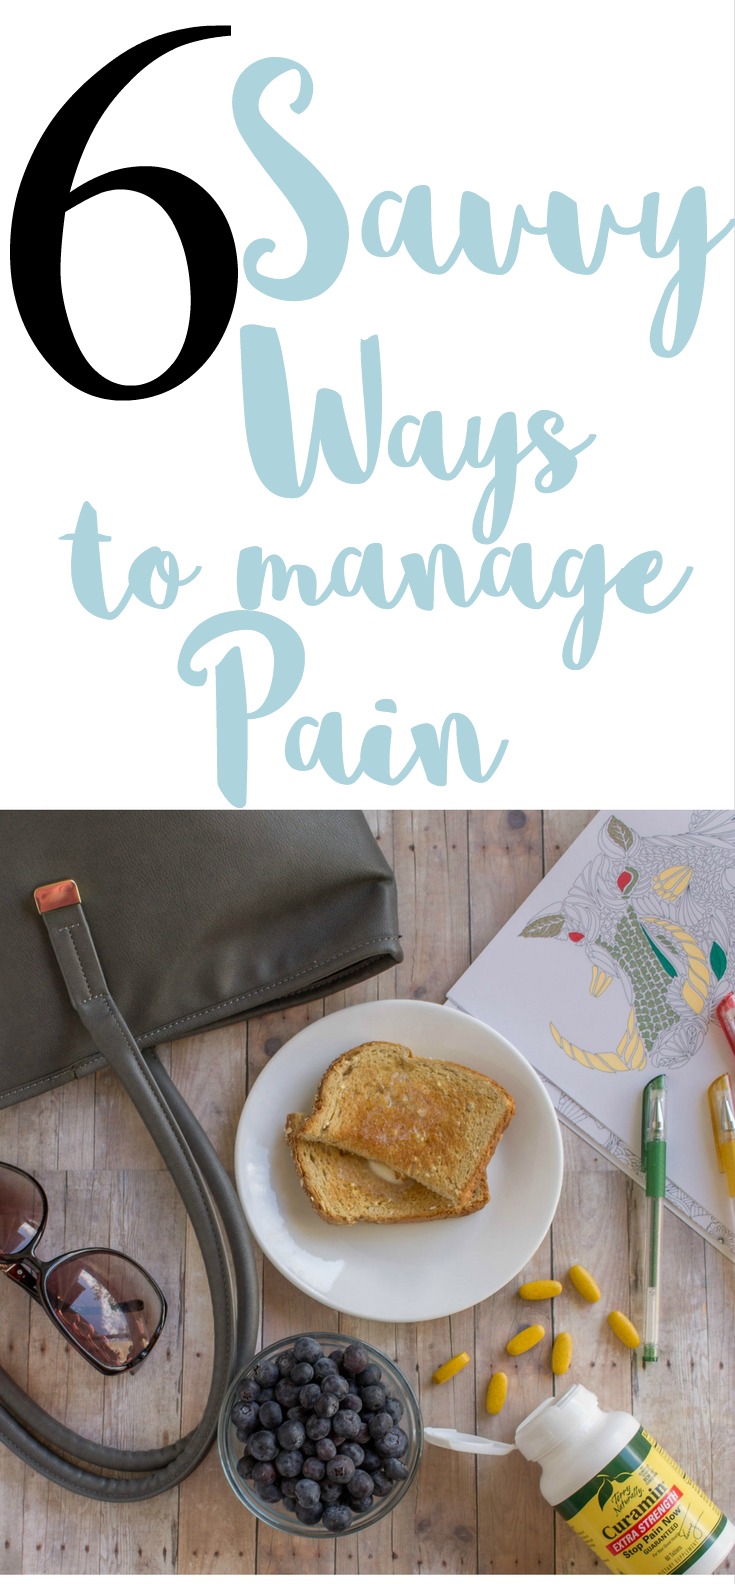 6 savvy ideas for managing pain on a frequent basis